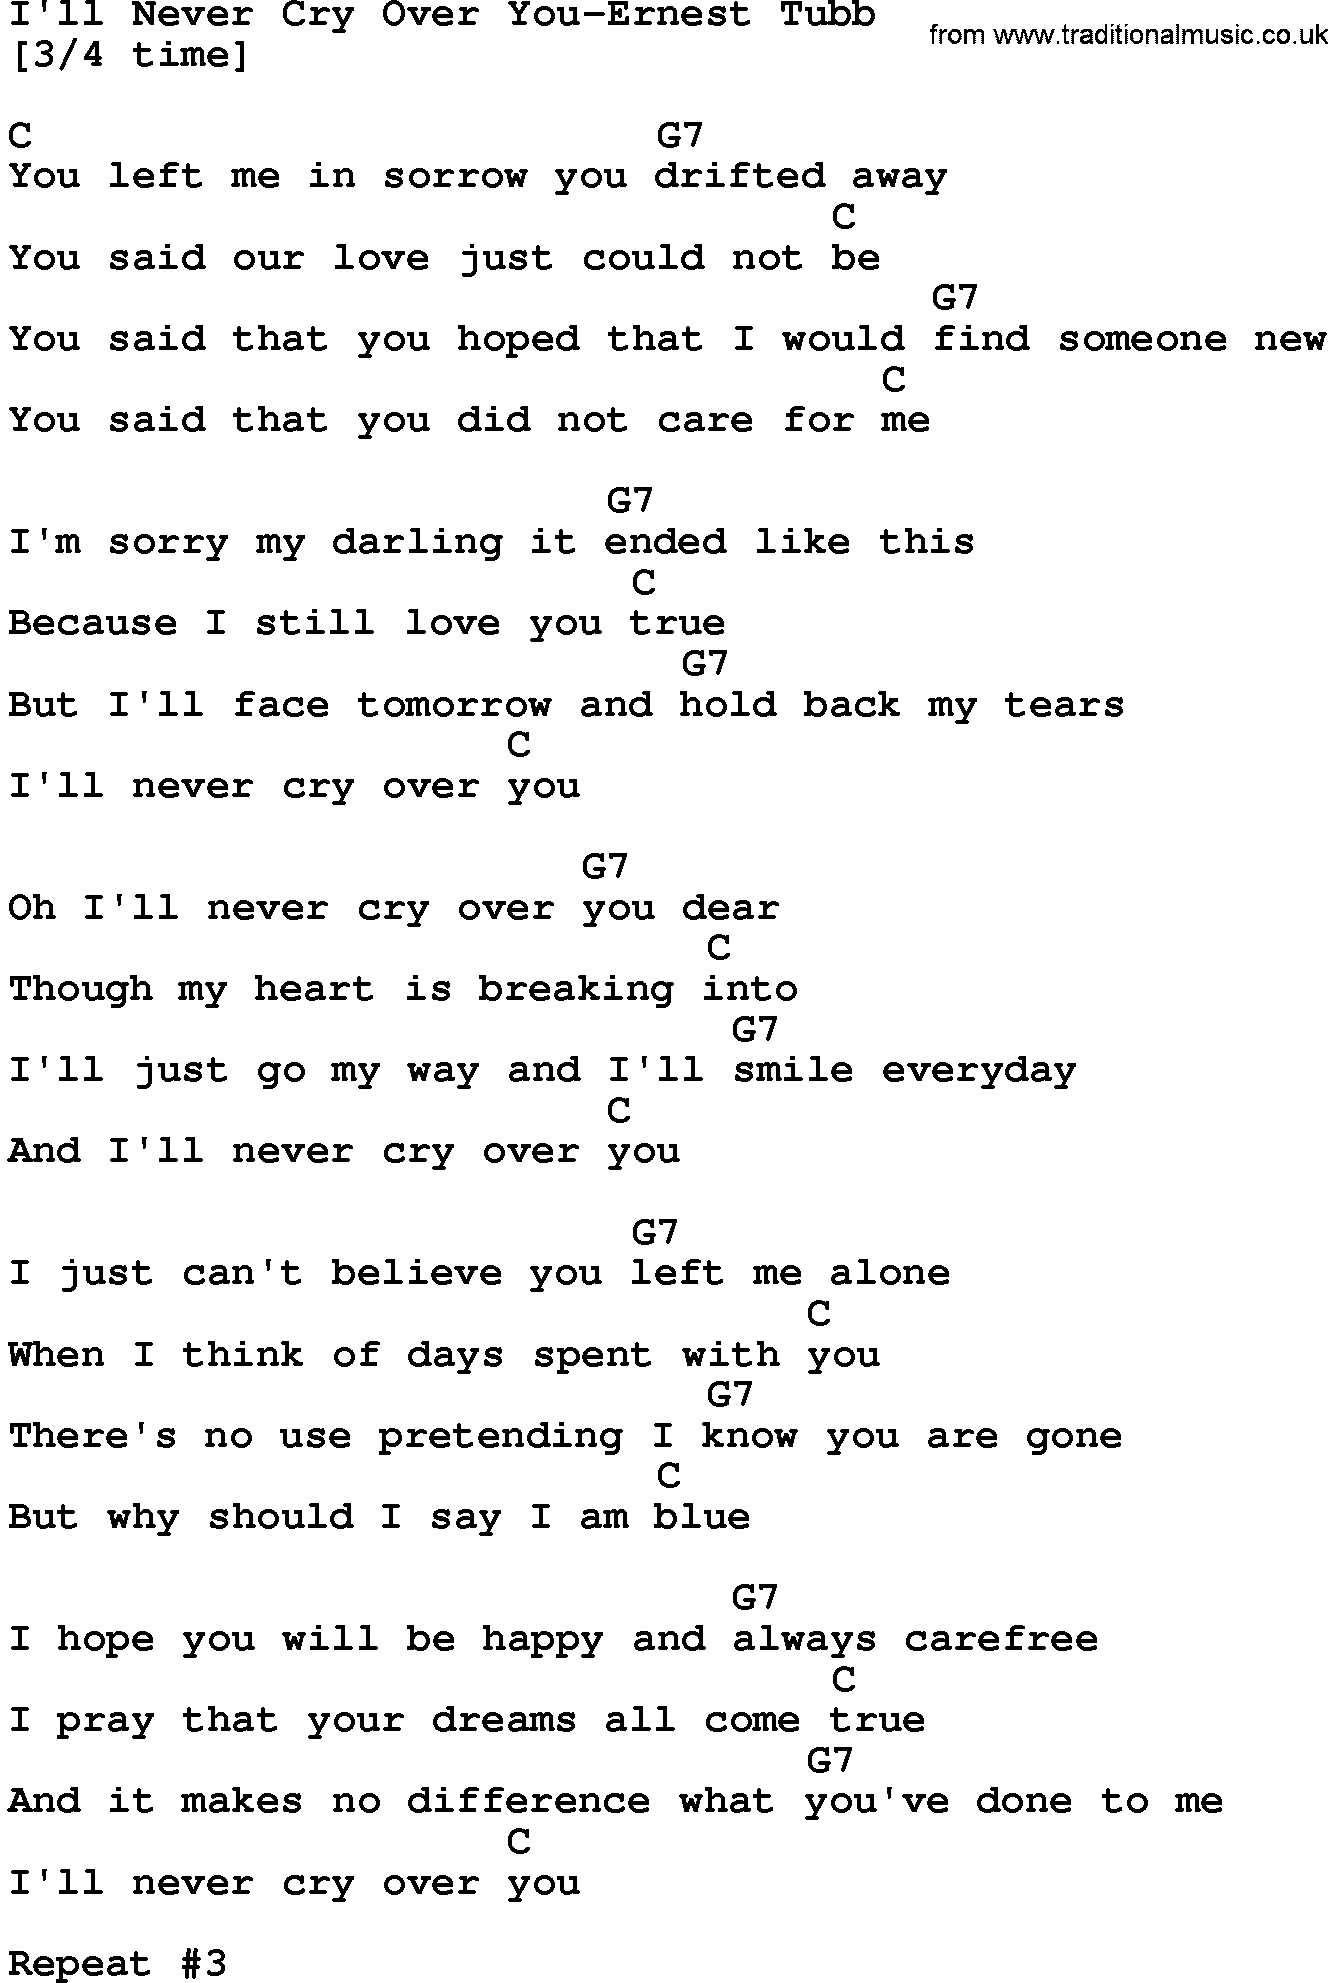 Country music song: I'll Never Cry Over You-Ernest Tubb lyrics and chords